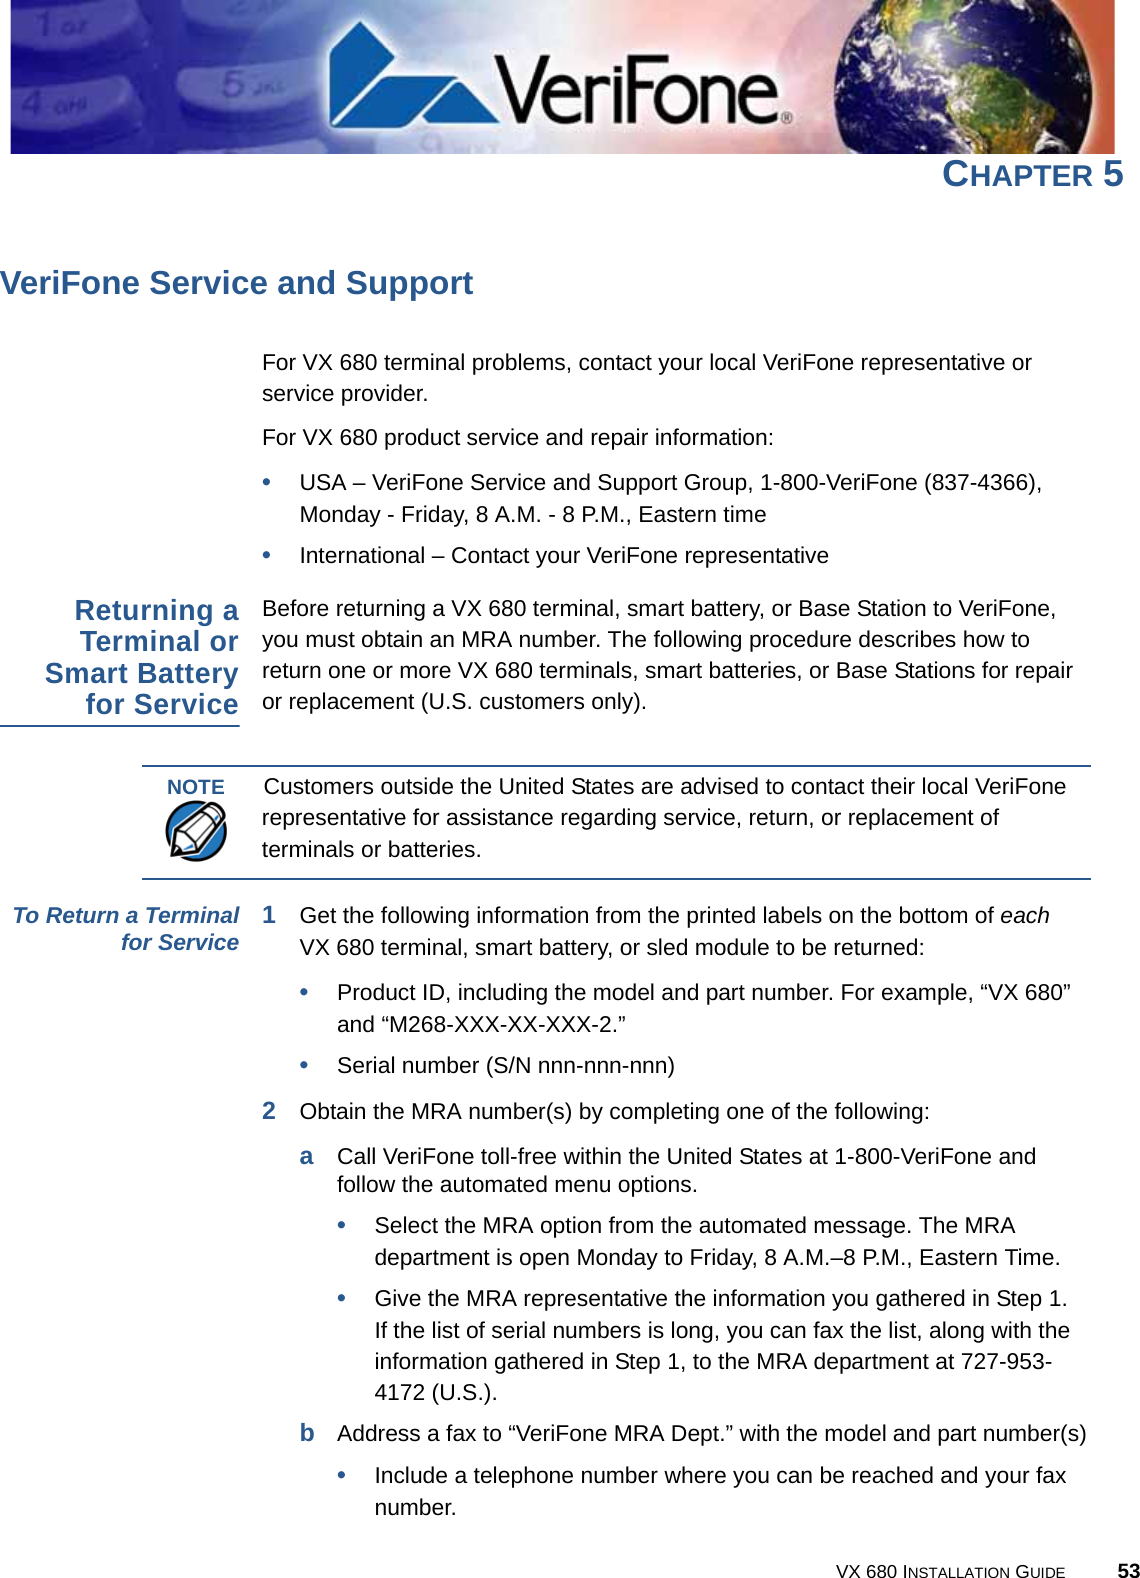 VX 680 INSTALLATION GUIDE 53CHAPTER 5VeriFone Service and SupportFor VX 680 terminal problems, contact your local VeriFone representative or service provider. For VX 680 product service and repair information:•USA – VeriFone Service and Support Group, 1-800-VeriFone (837-4366), Monday - Friday, 8 A.M. - 8 P.M., Eastern time•International – Contact your VeriFone representative Returning aTerminal orSmart Batteryfor ServiceBefore returning a VX 680 terminal, smart battery, or Base Station to VeriFone, you must obtain an MRA number. The following procedure describes how to return one or more VX 680 terminals, smart batteries, or Base Stations for repair or replacement (U.S. customers only). To Return a Terminalfor Service 1Get the following information from the printed labels on the bottom of each VX 680 terminal, smart battery, or sled module to be returned:•Product ID, including the model and part number. For example, “VX 680” and “M268-XXX-XX-XXX-2.”•Serial number (S/N nnn-nnn-nnn)2Obtain the MRA number(s) by completing one of the following:aCall VeriFone toll-free within the United States at 1-800-VeriFone and follow the automated menu options.•Select the MRA option from the automated message. The MRA department is open Monday to Friday, 8 A.M.–8 P.M., Eastern Time.•Give the MRA representative the information you gathered in Step 1.If the list of serial numbers is long, you can fax the list, along with the information gathered in Step 1, to the MRA department at 727-953-4172 (U.S.).bAddress a fax to “VeriFone MRA Dept.” with the model and part number(s)•Include a telephone number where you can be reached and your fax number.NOTECustomers outside the United States are advised to contact their local VeriFone representative for assistance regarding service, return, or replacement of terminals or batteries.